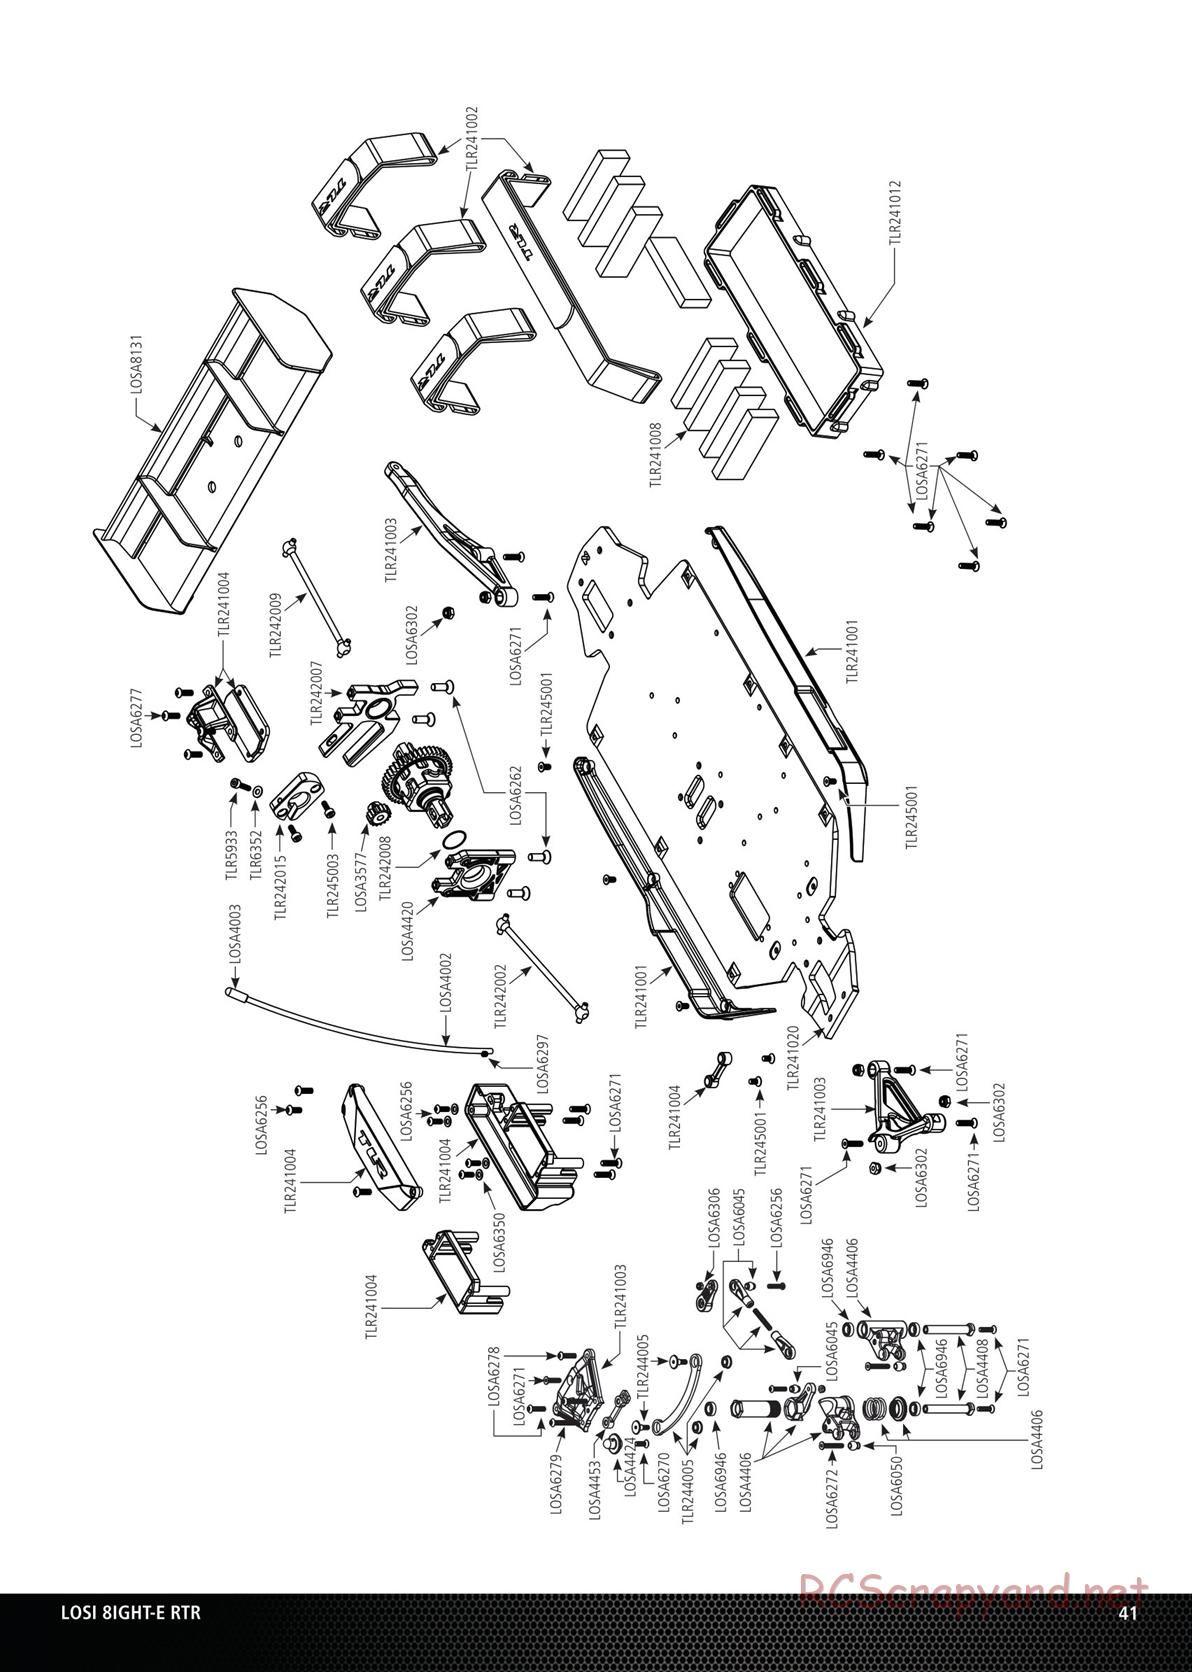 Team Losi - 8ight-E - Parts List and Exploded View - Page 8